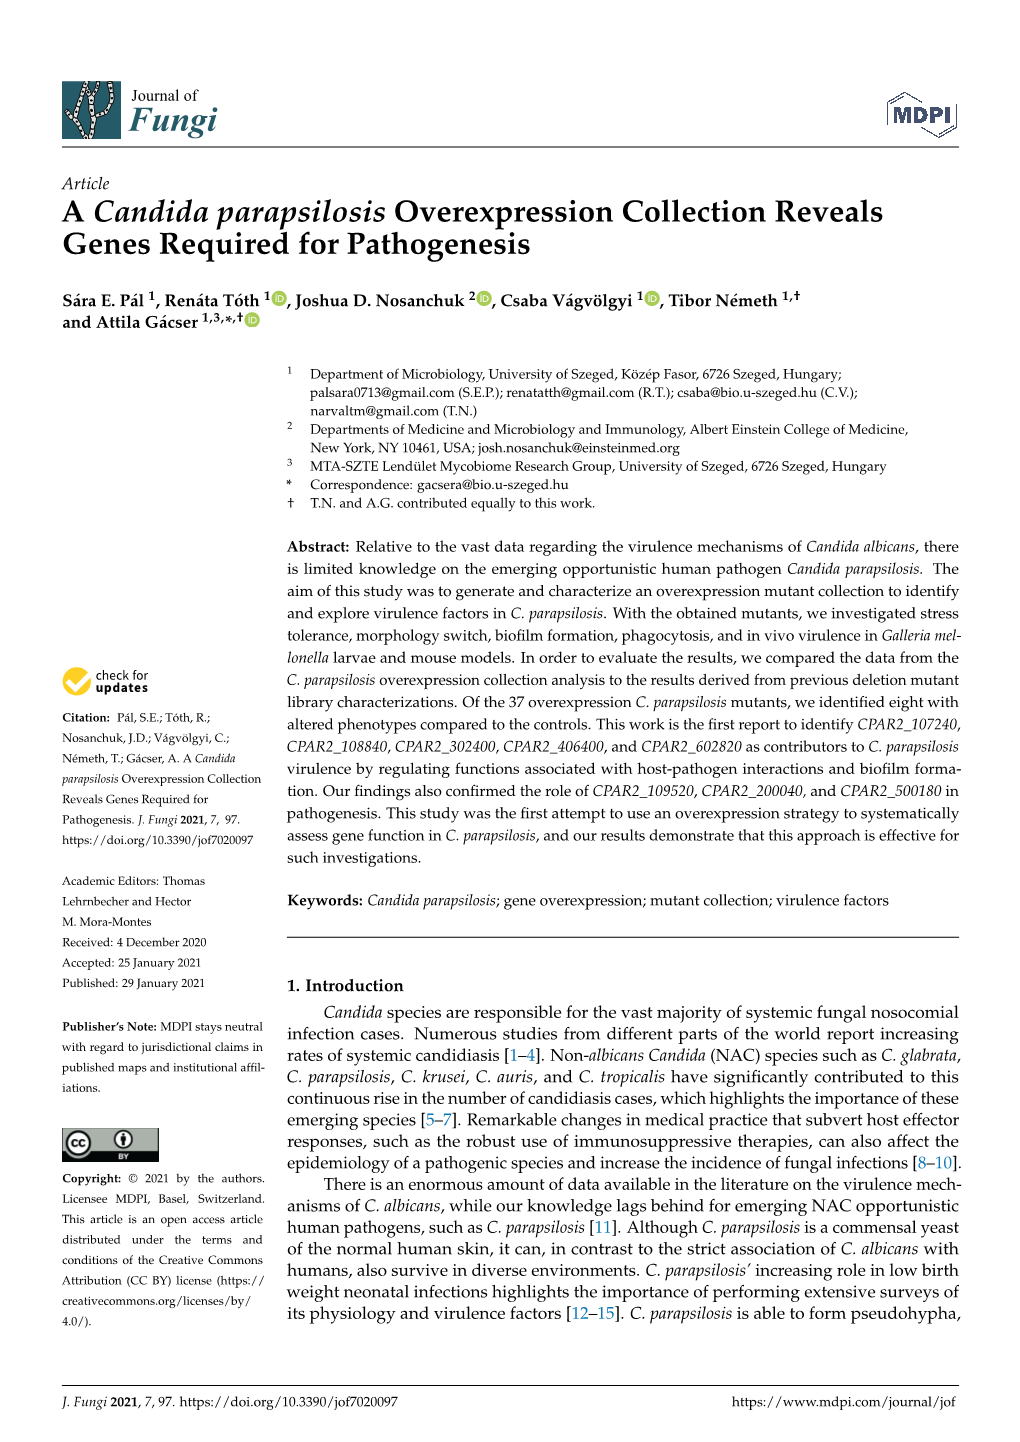 A Candida Parapsilosis Overexpression Collection Reveals Genes Required for Pathogenesis